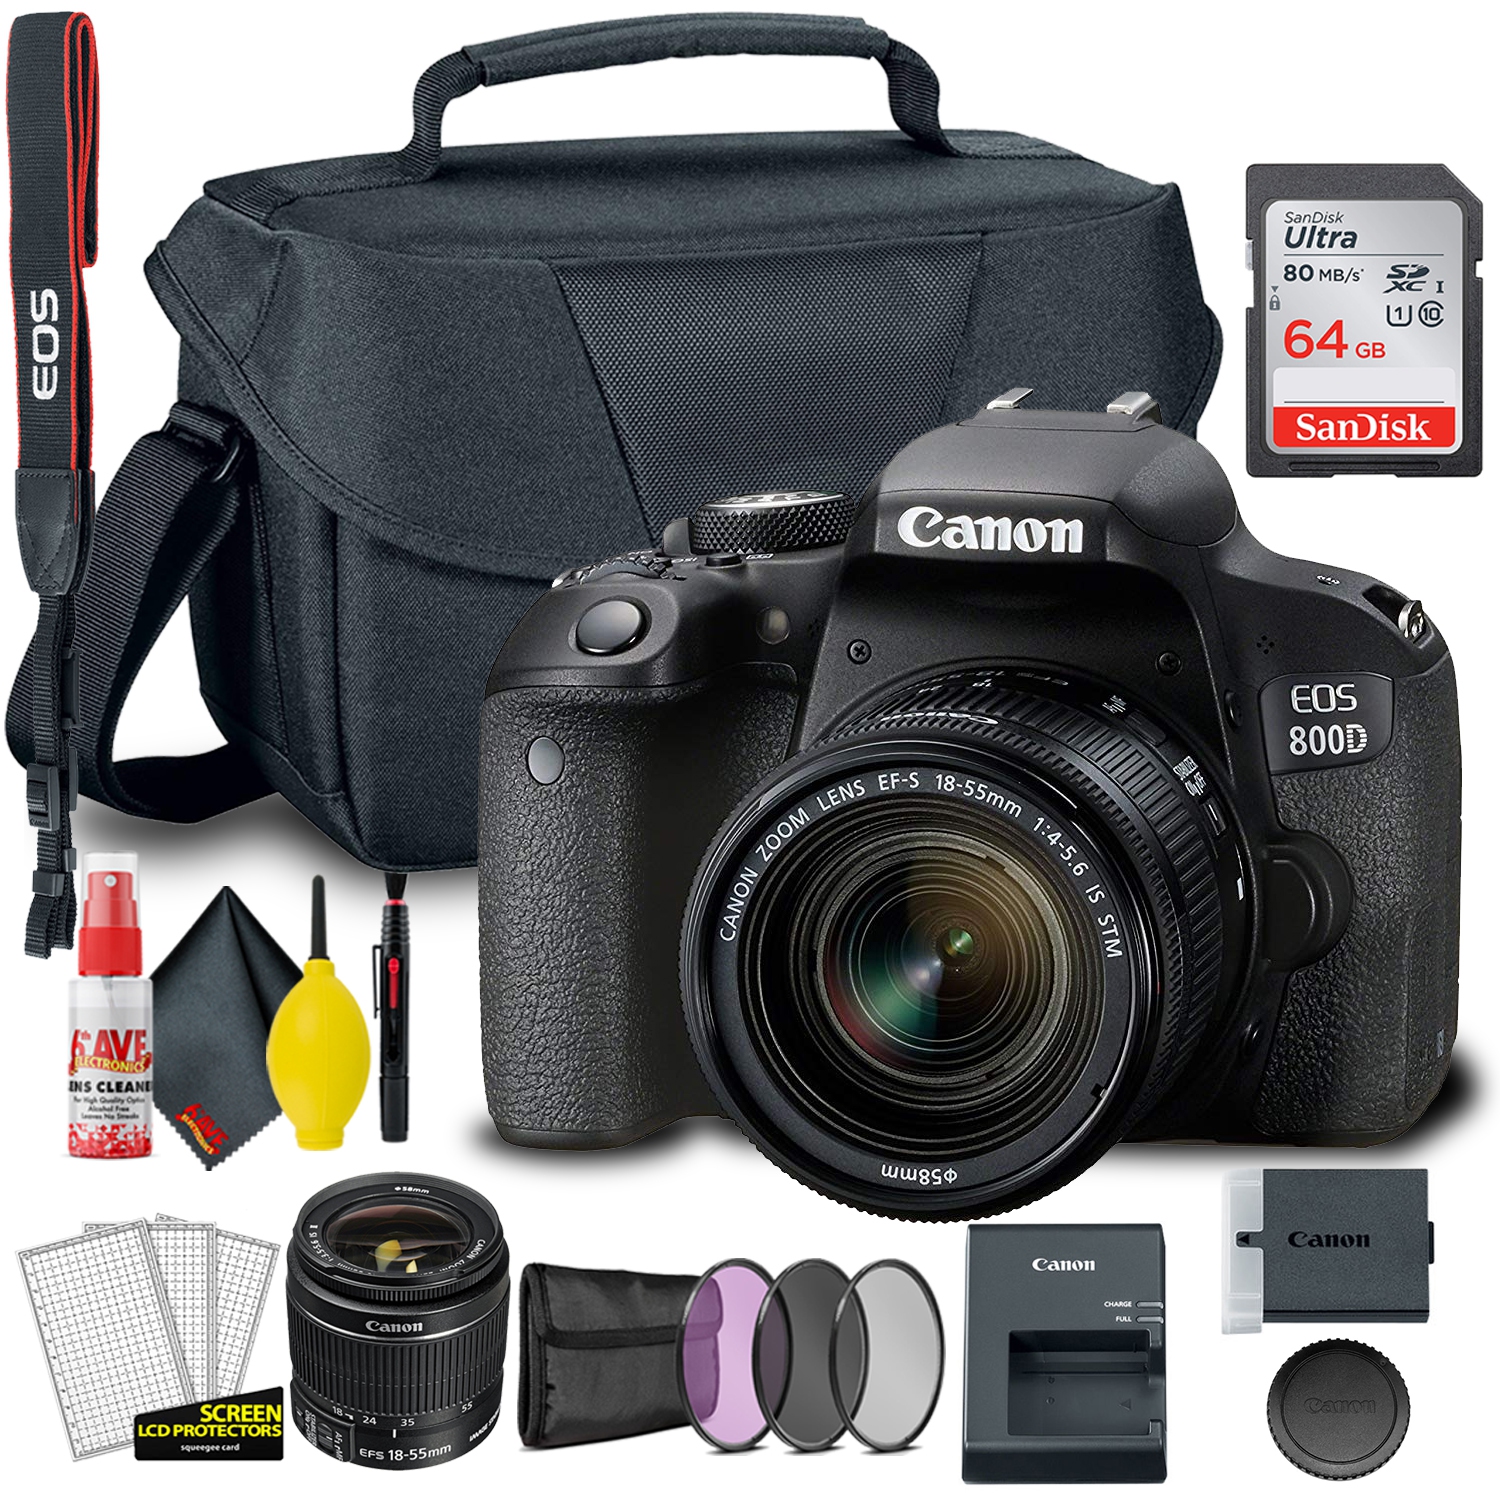 Canon EOS 800D / Rebel T7i DSLR Camera with 18-55mm Lens + Creative Filter Set, EOS Camera Bag + Sandisk Ultra 64GB Card + 6AVE Electronics Cleaning Set, And More (International